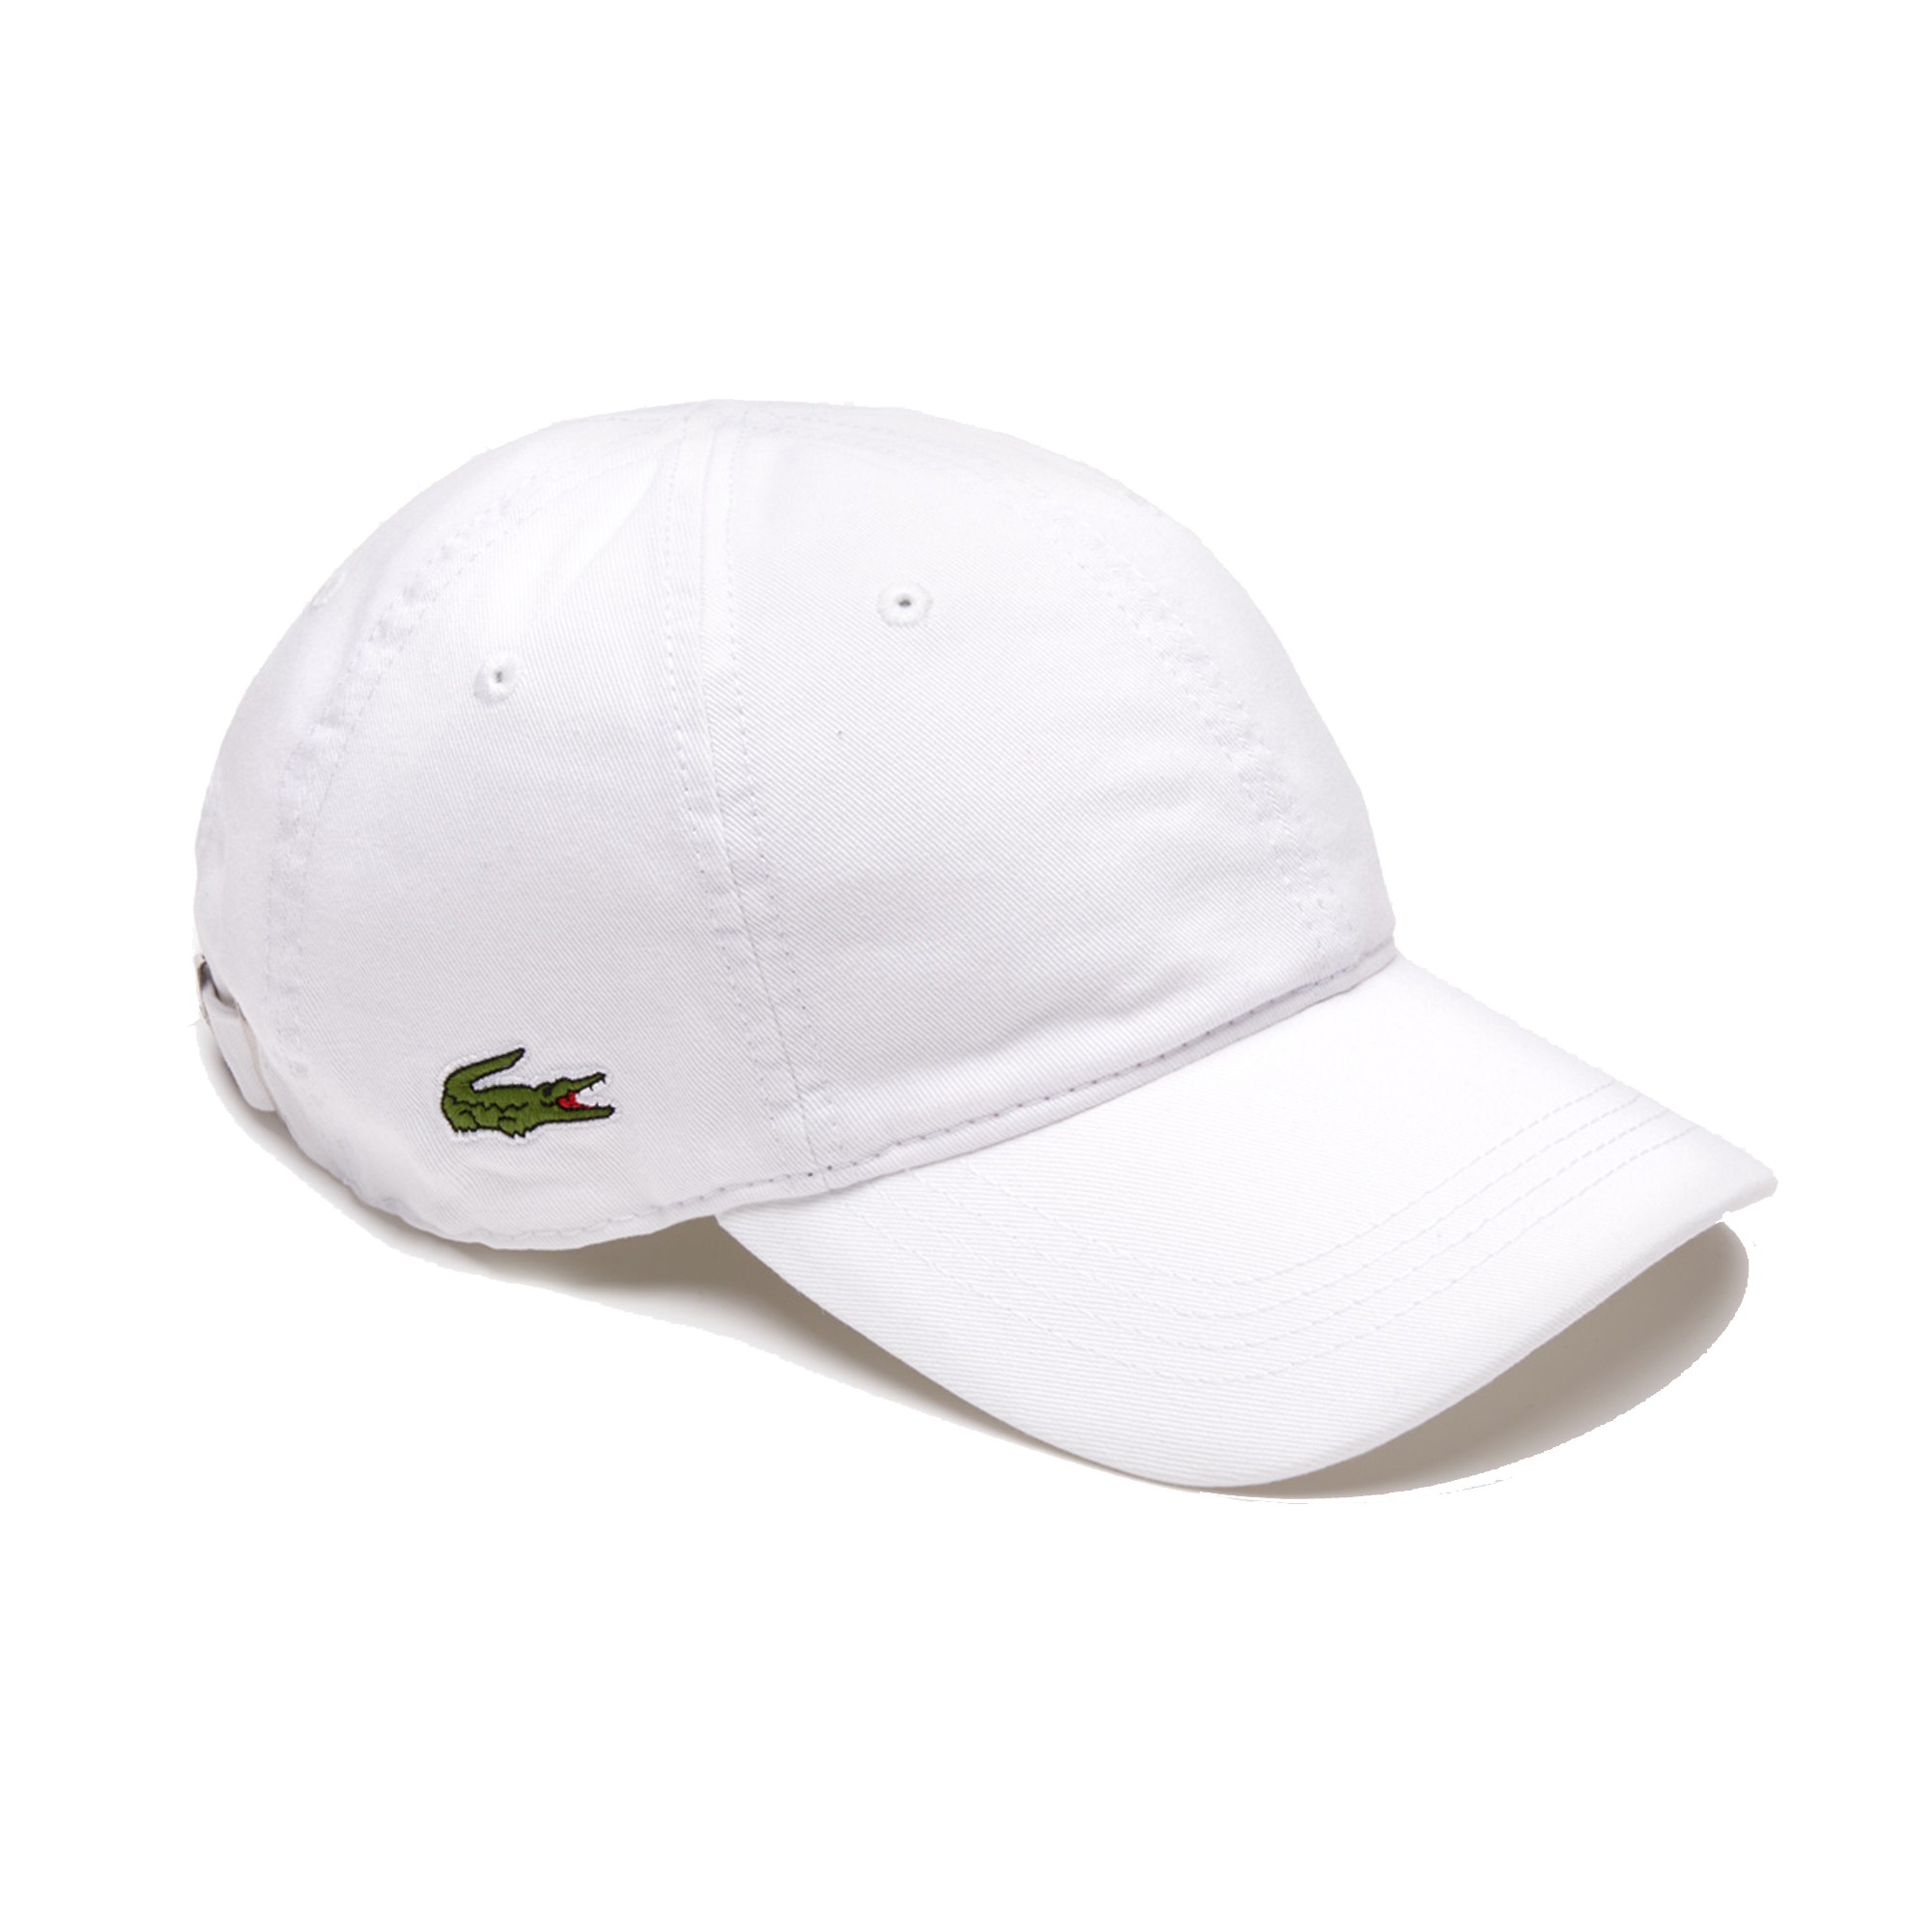 LACOSTE Caps and visors RK9811 001 BLANCO